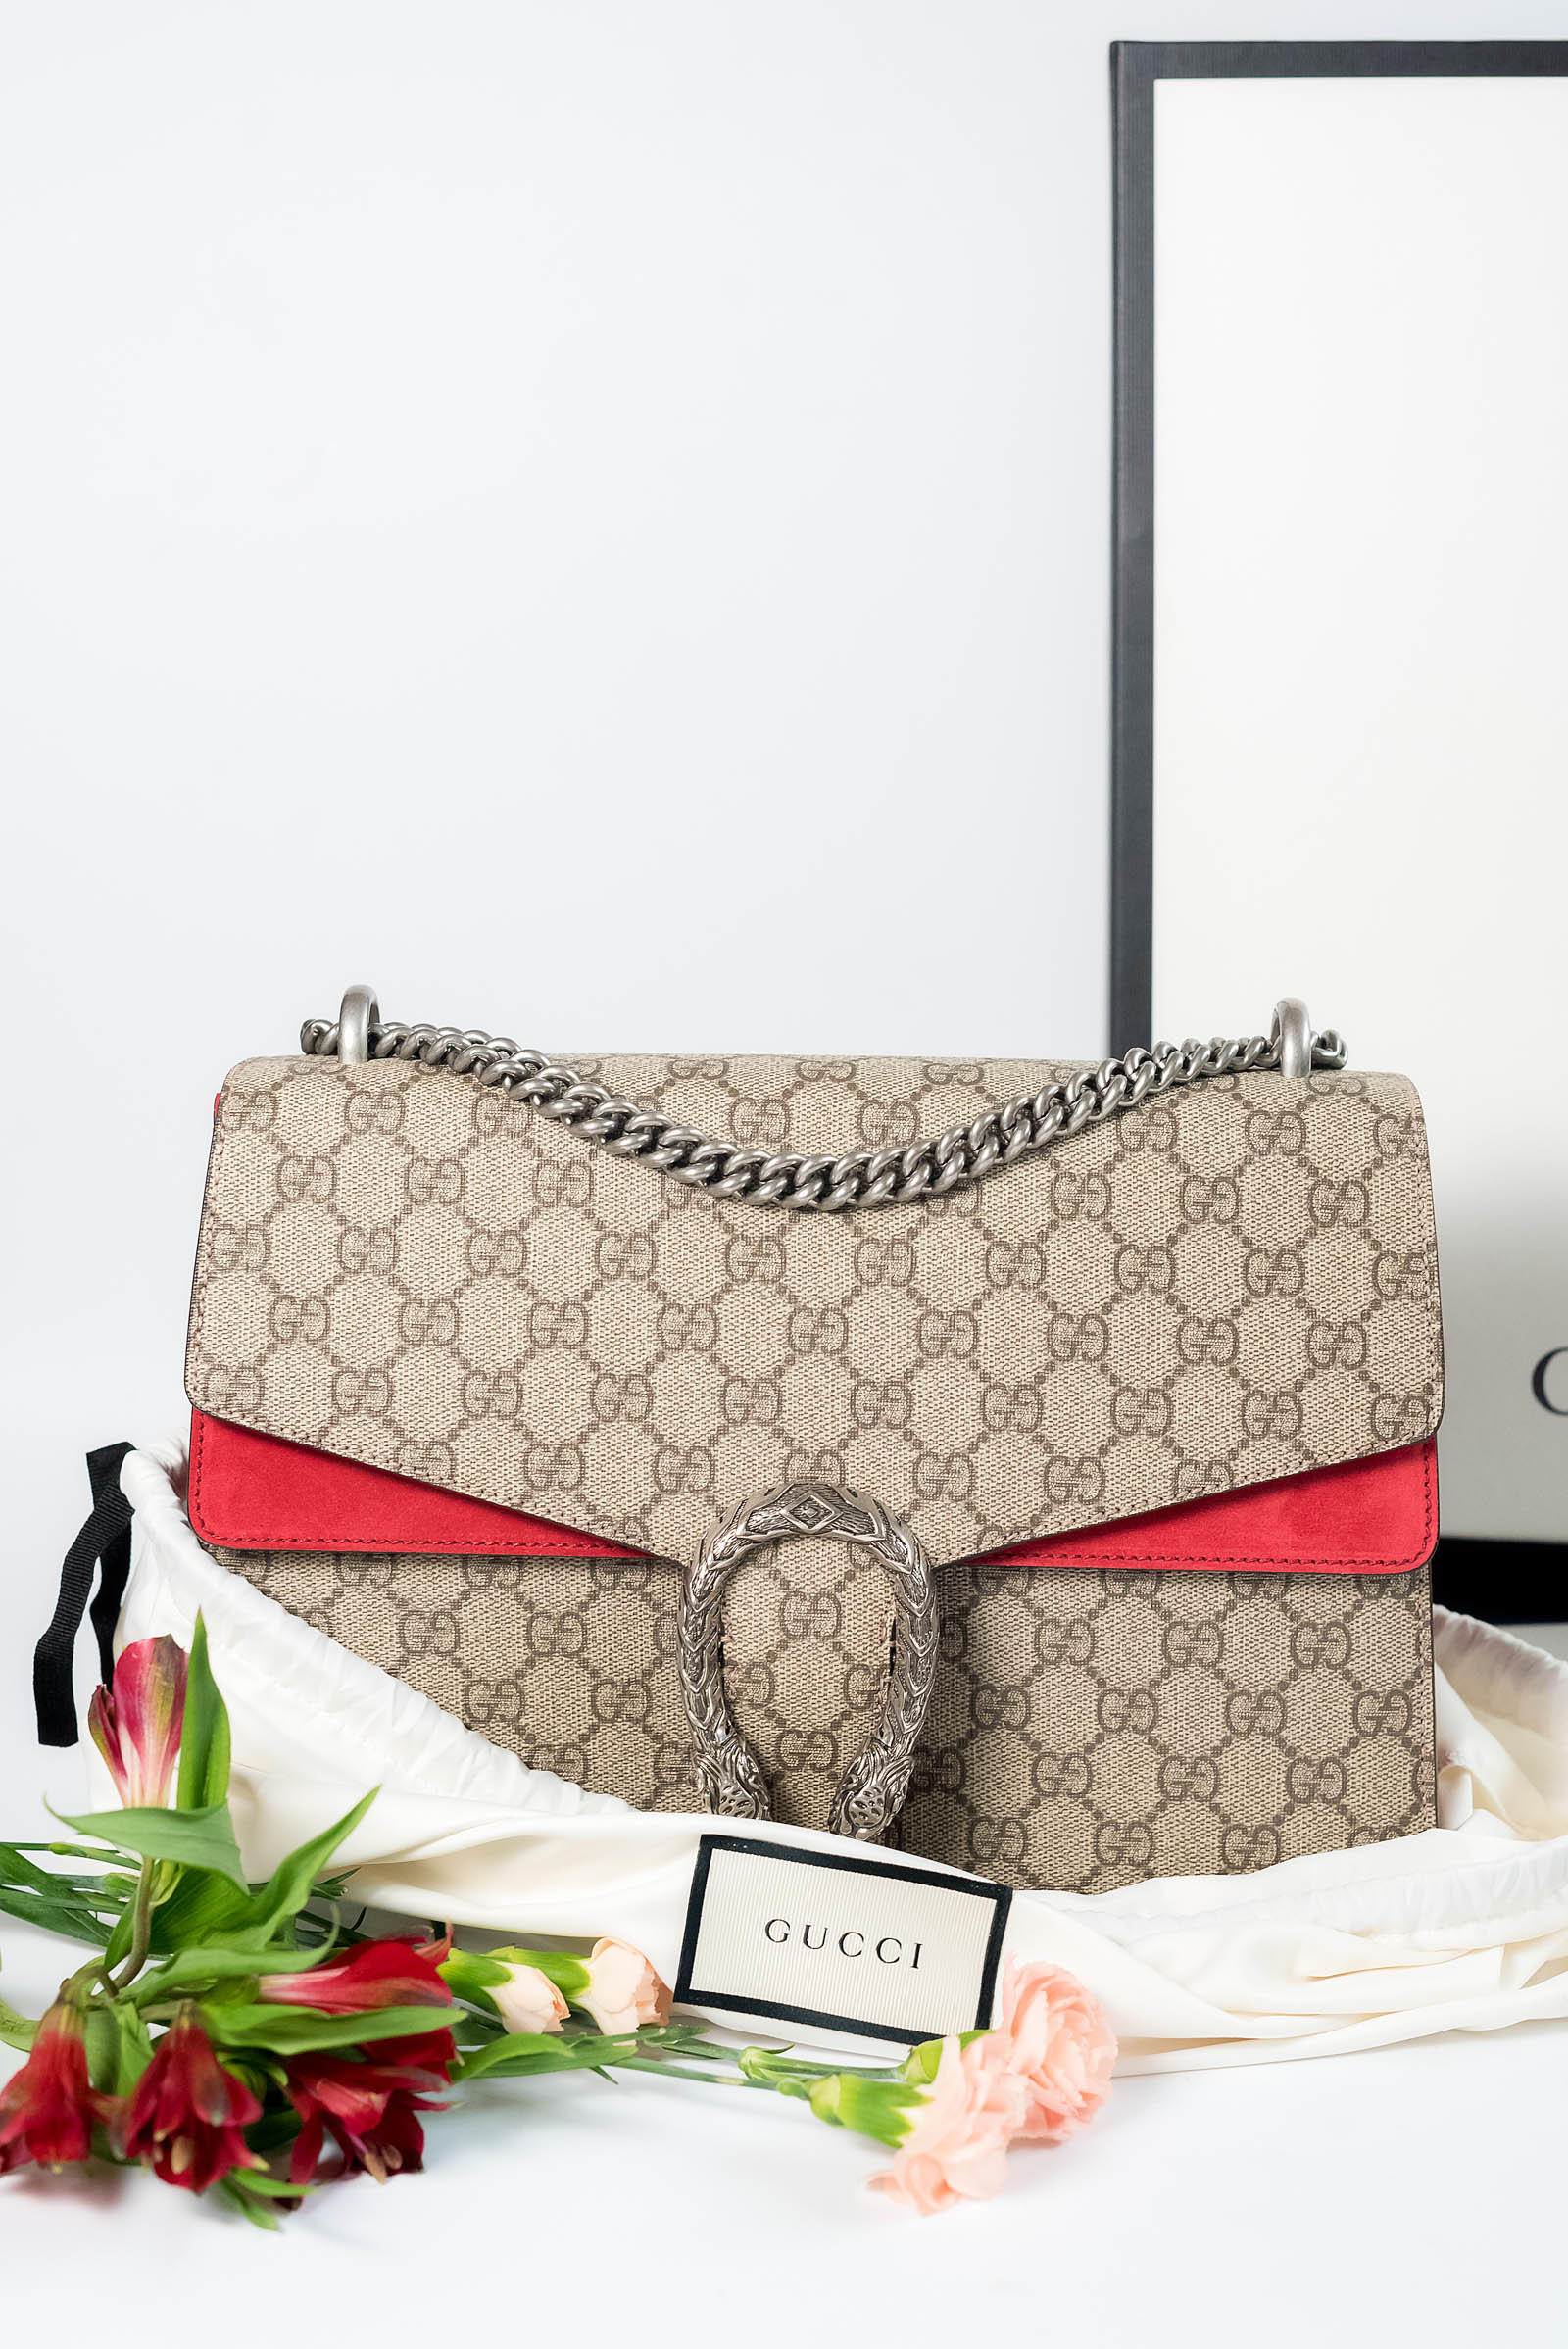 how to clean gucci dionysus bag